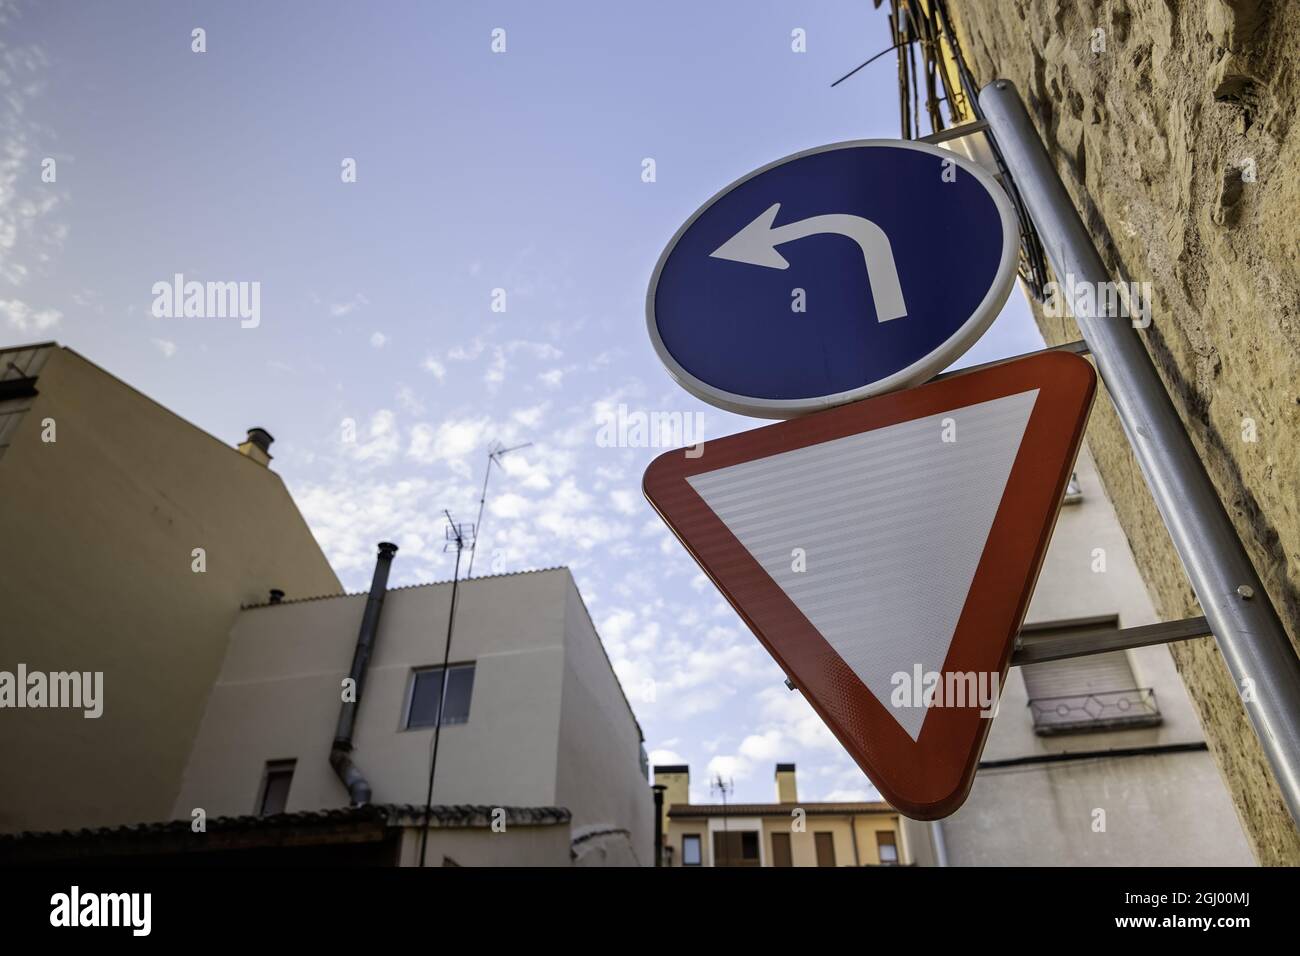 Detail of traffic signs for vehicles, road safety Stock Photo